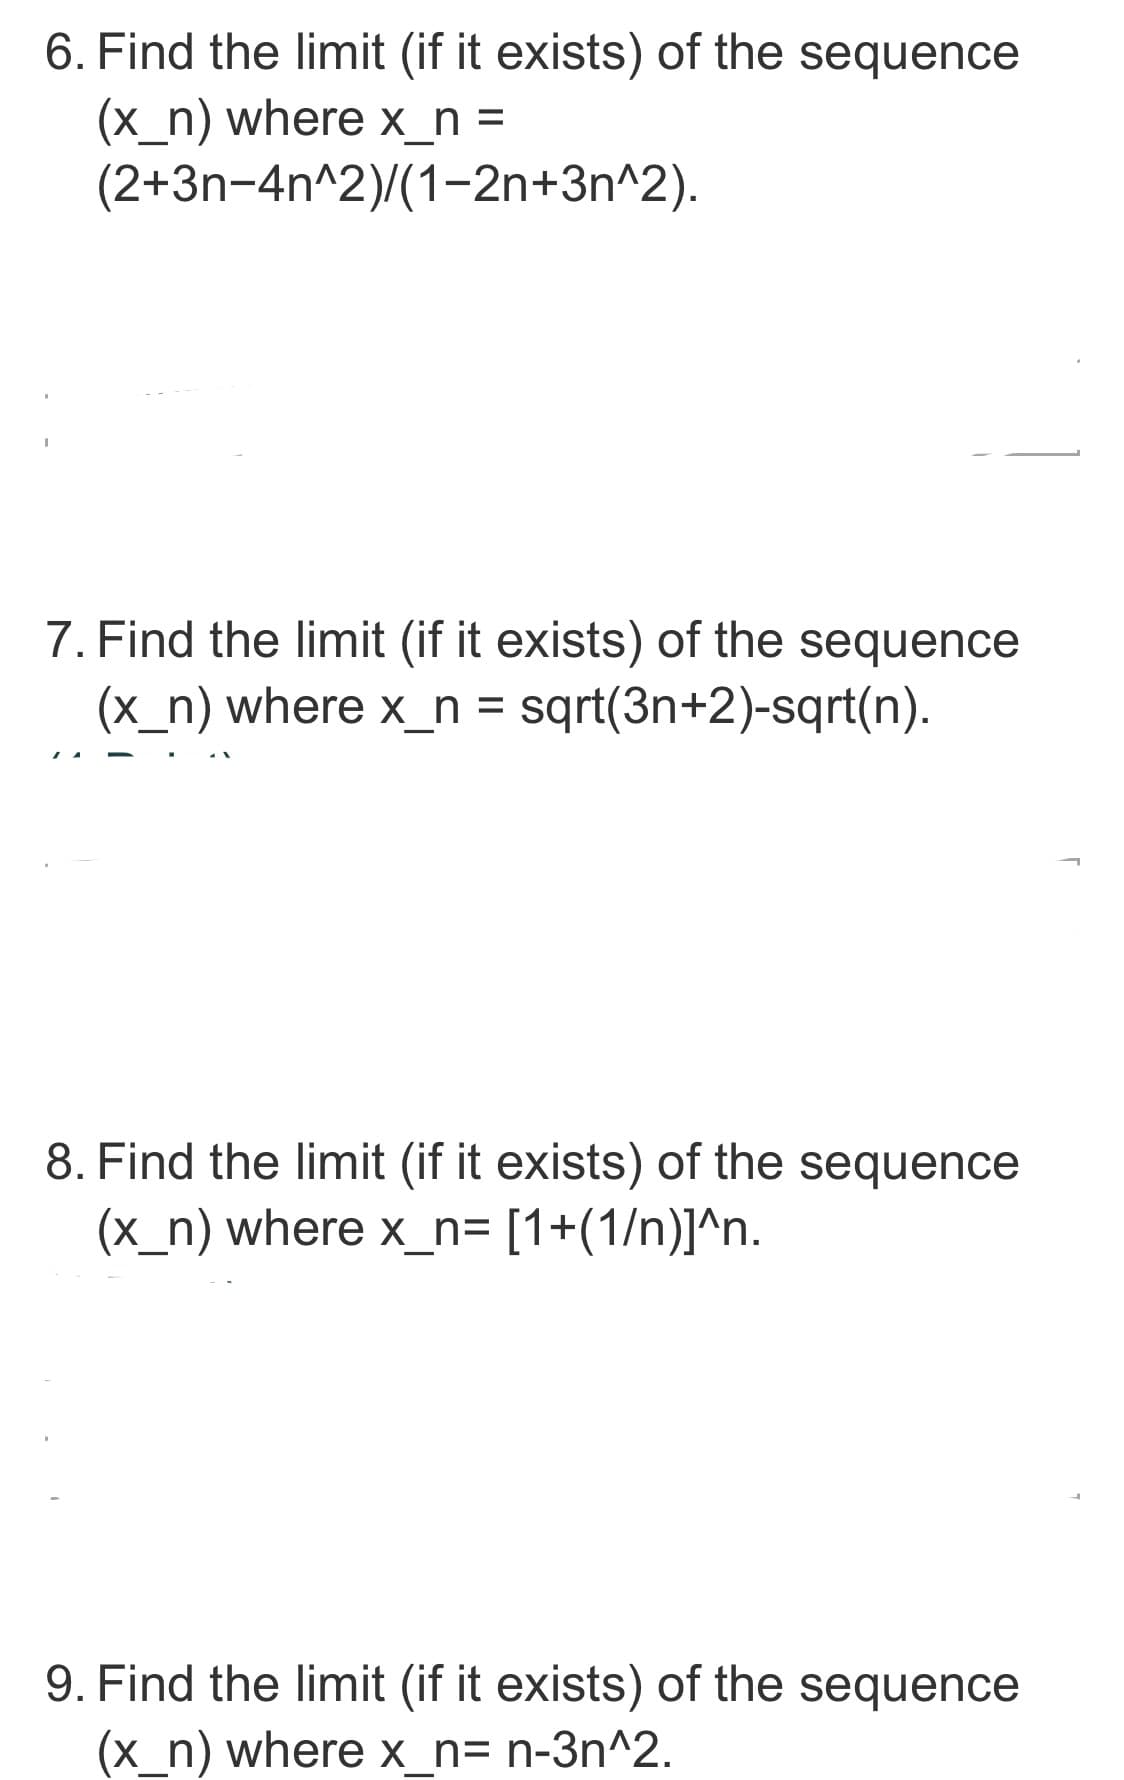 6. Find the limit (if it exists) of the sequence
(x_n) where x_n=
(2+3n-4n^2)/(1-2n+3n^2).
I
7. Find the limit (if it exists) of the sequence
(x_n) where x_n = sqrt(3n+2)-sqrt(n).
8. Find the limit (if it exists) of the sequence
(x_n) where x_n= [1+(1/n)]^n.
9. Find the limit (if it exists) of the sequence
(x_n) where x_n= n-3n^2.